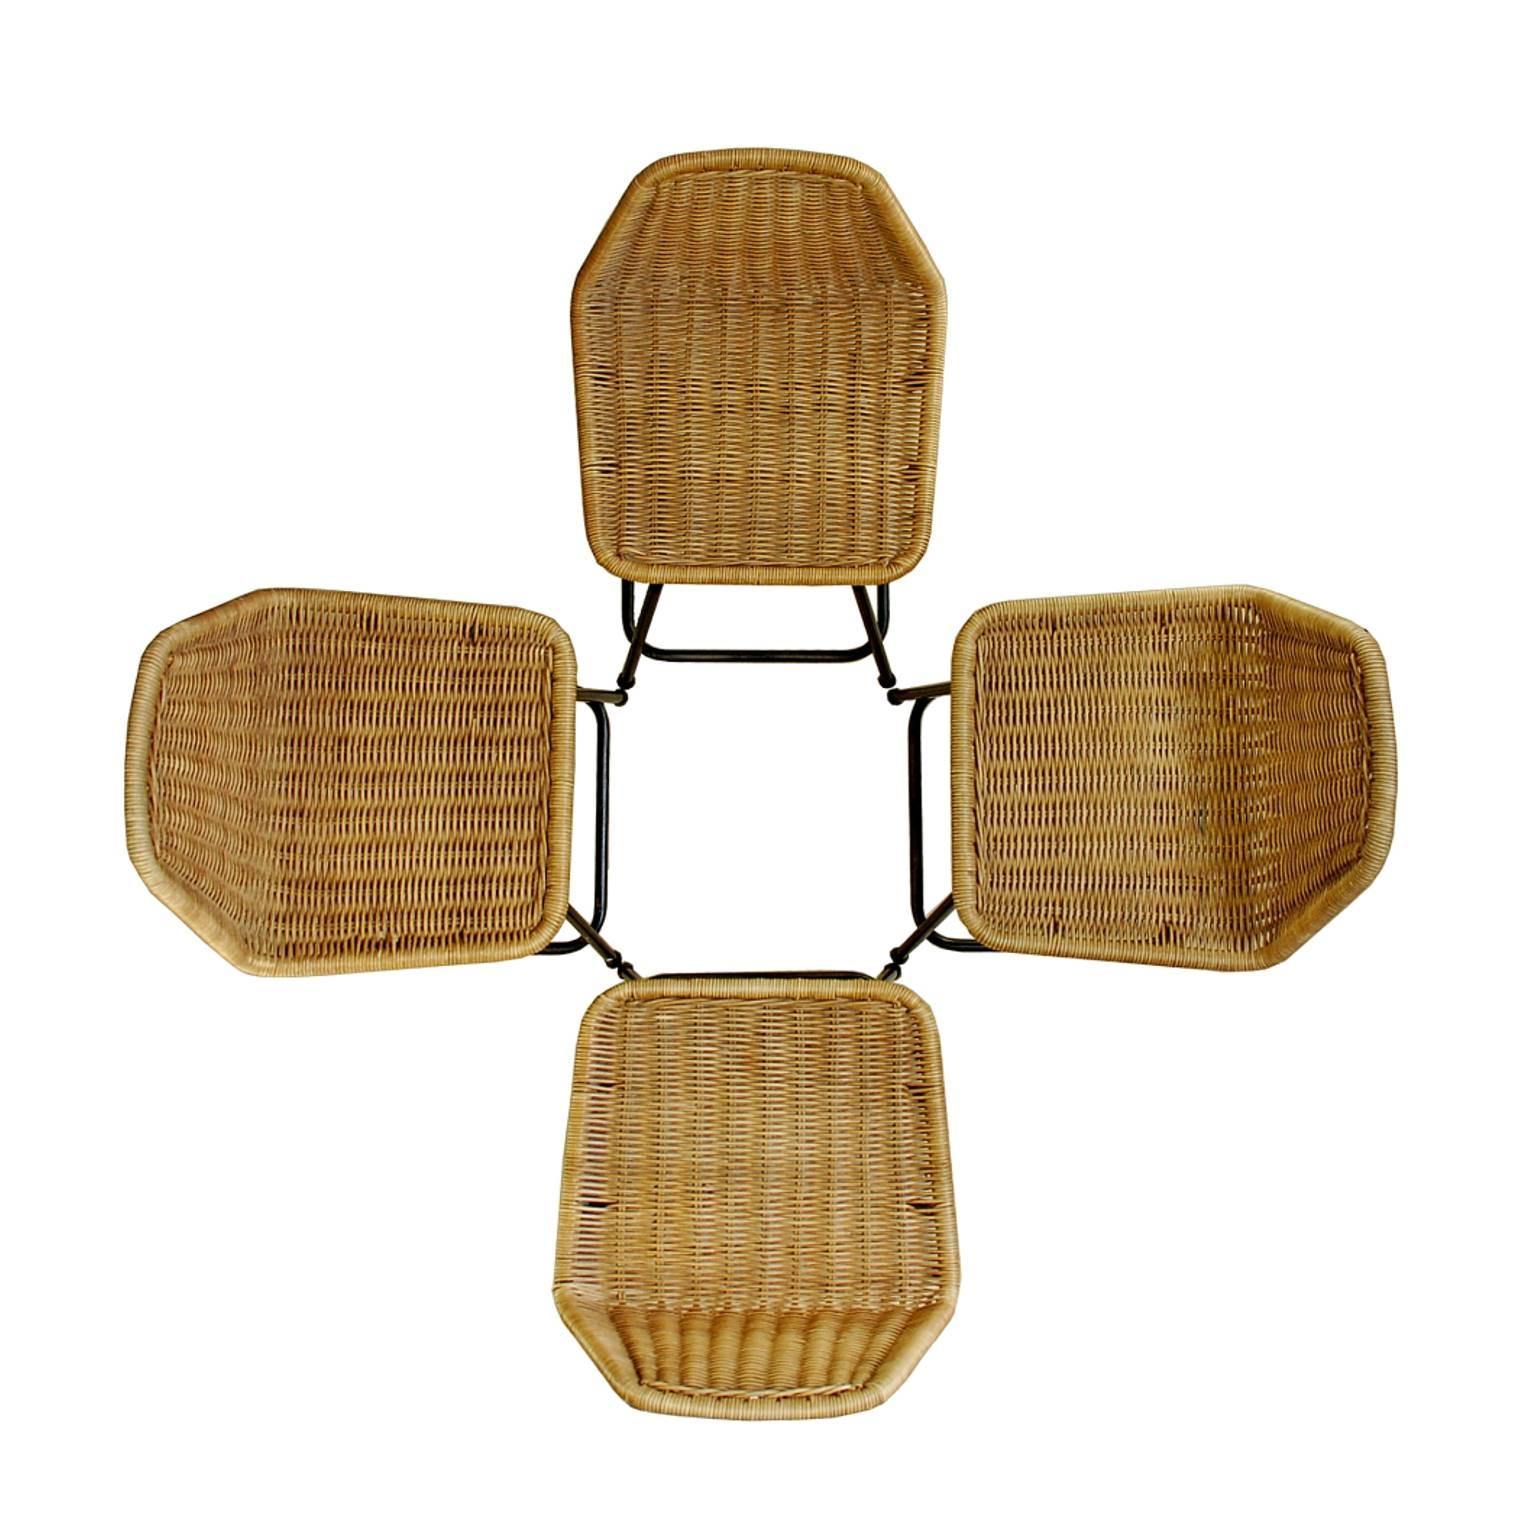 Set of four elegant stools with a black metal frame and wicker seats. They were designed in the 1960 by Dirk Van Sliedrecht and produced by Rohe Noordwolde. Please check the dimensions, these are small, chair-size stools.